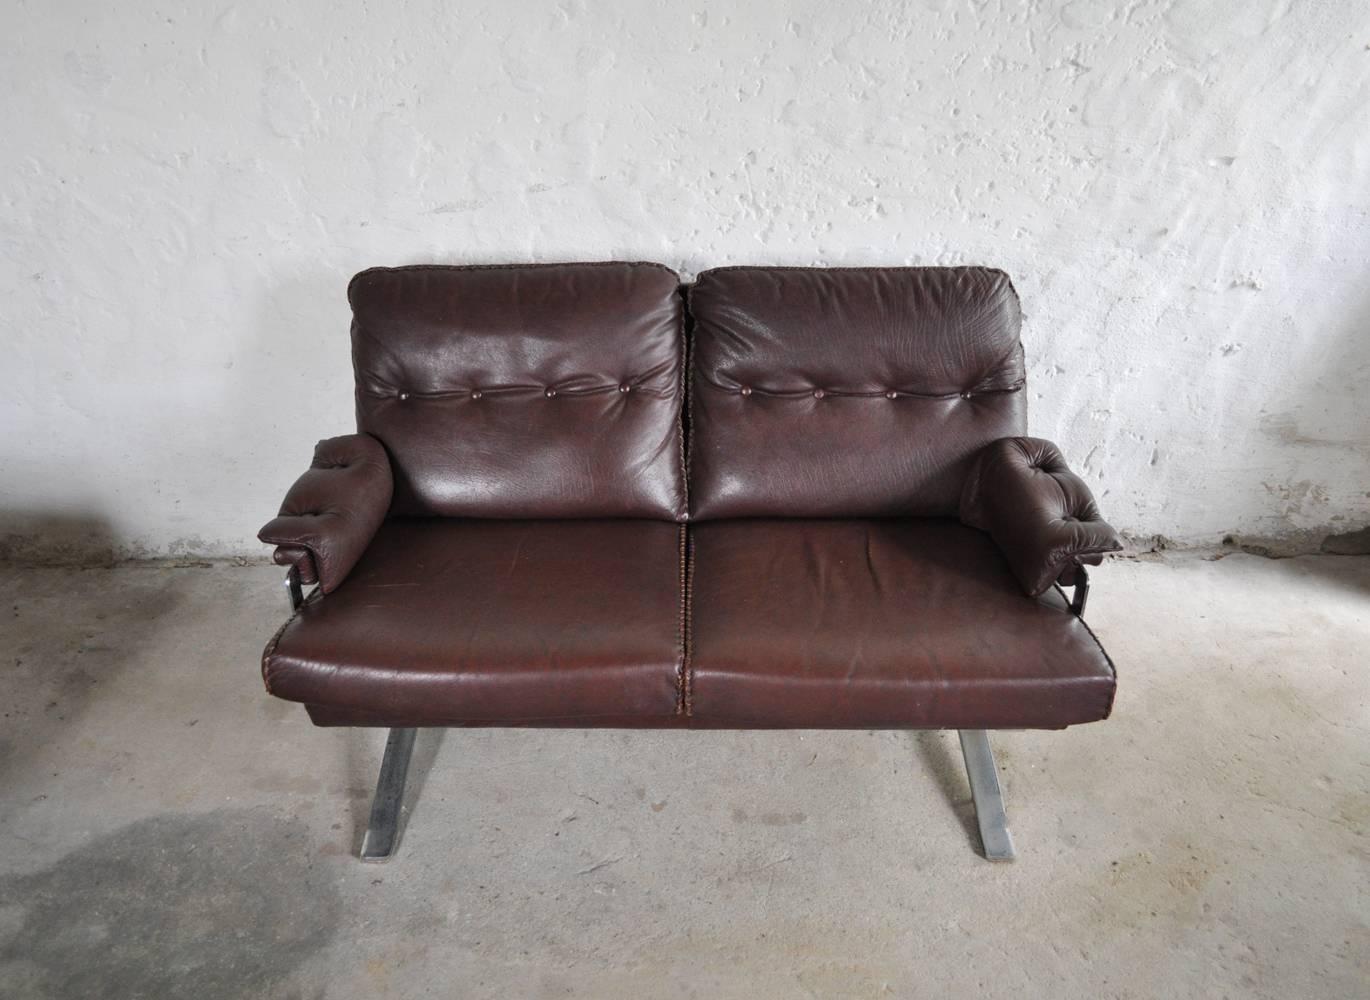 Reddish brown leather and chrome sofa by Arne Norell.
High quality hand-stitched leather.
Very fine vintage condition.
Lounge chair and three-seat sofa also available.